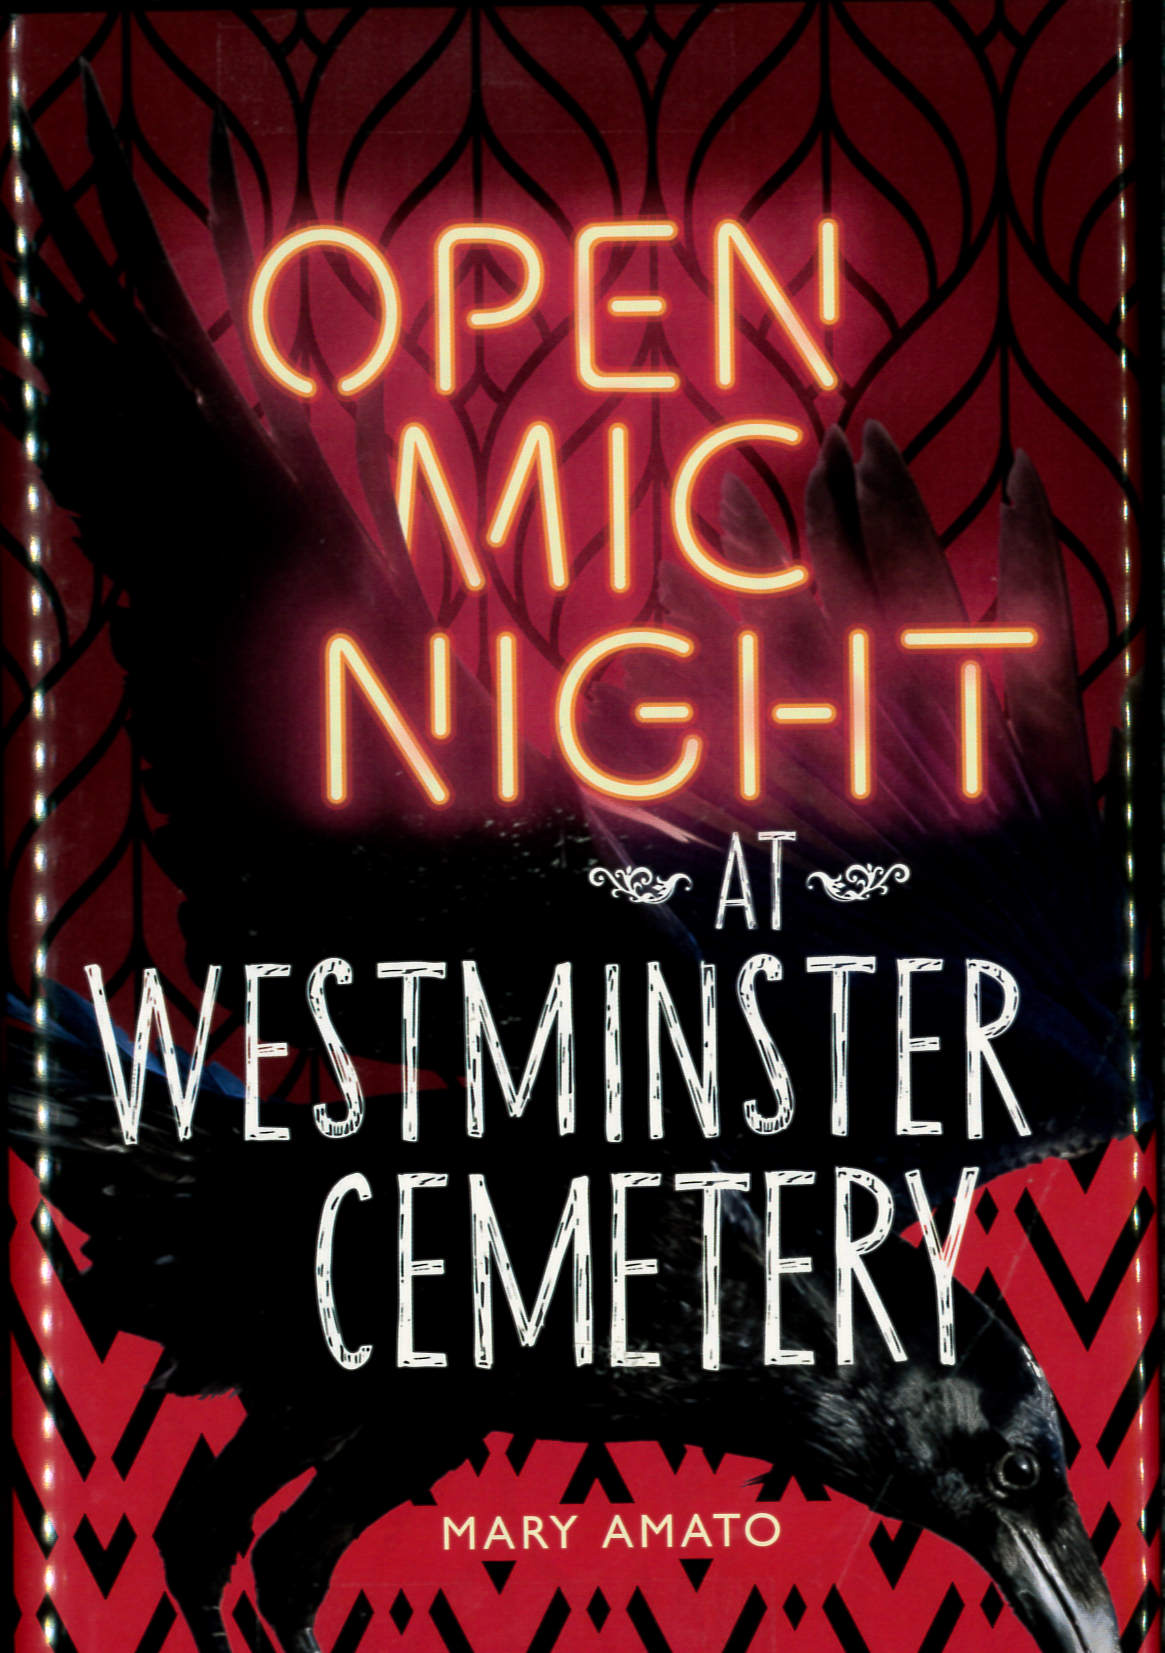 Open mic night at Westminster Cemetery /